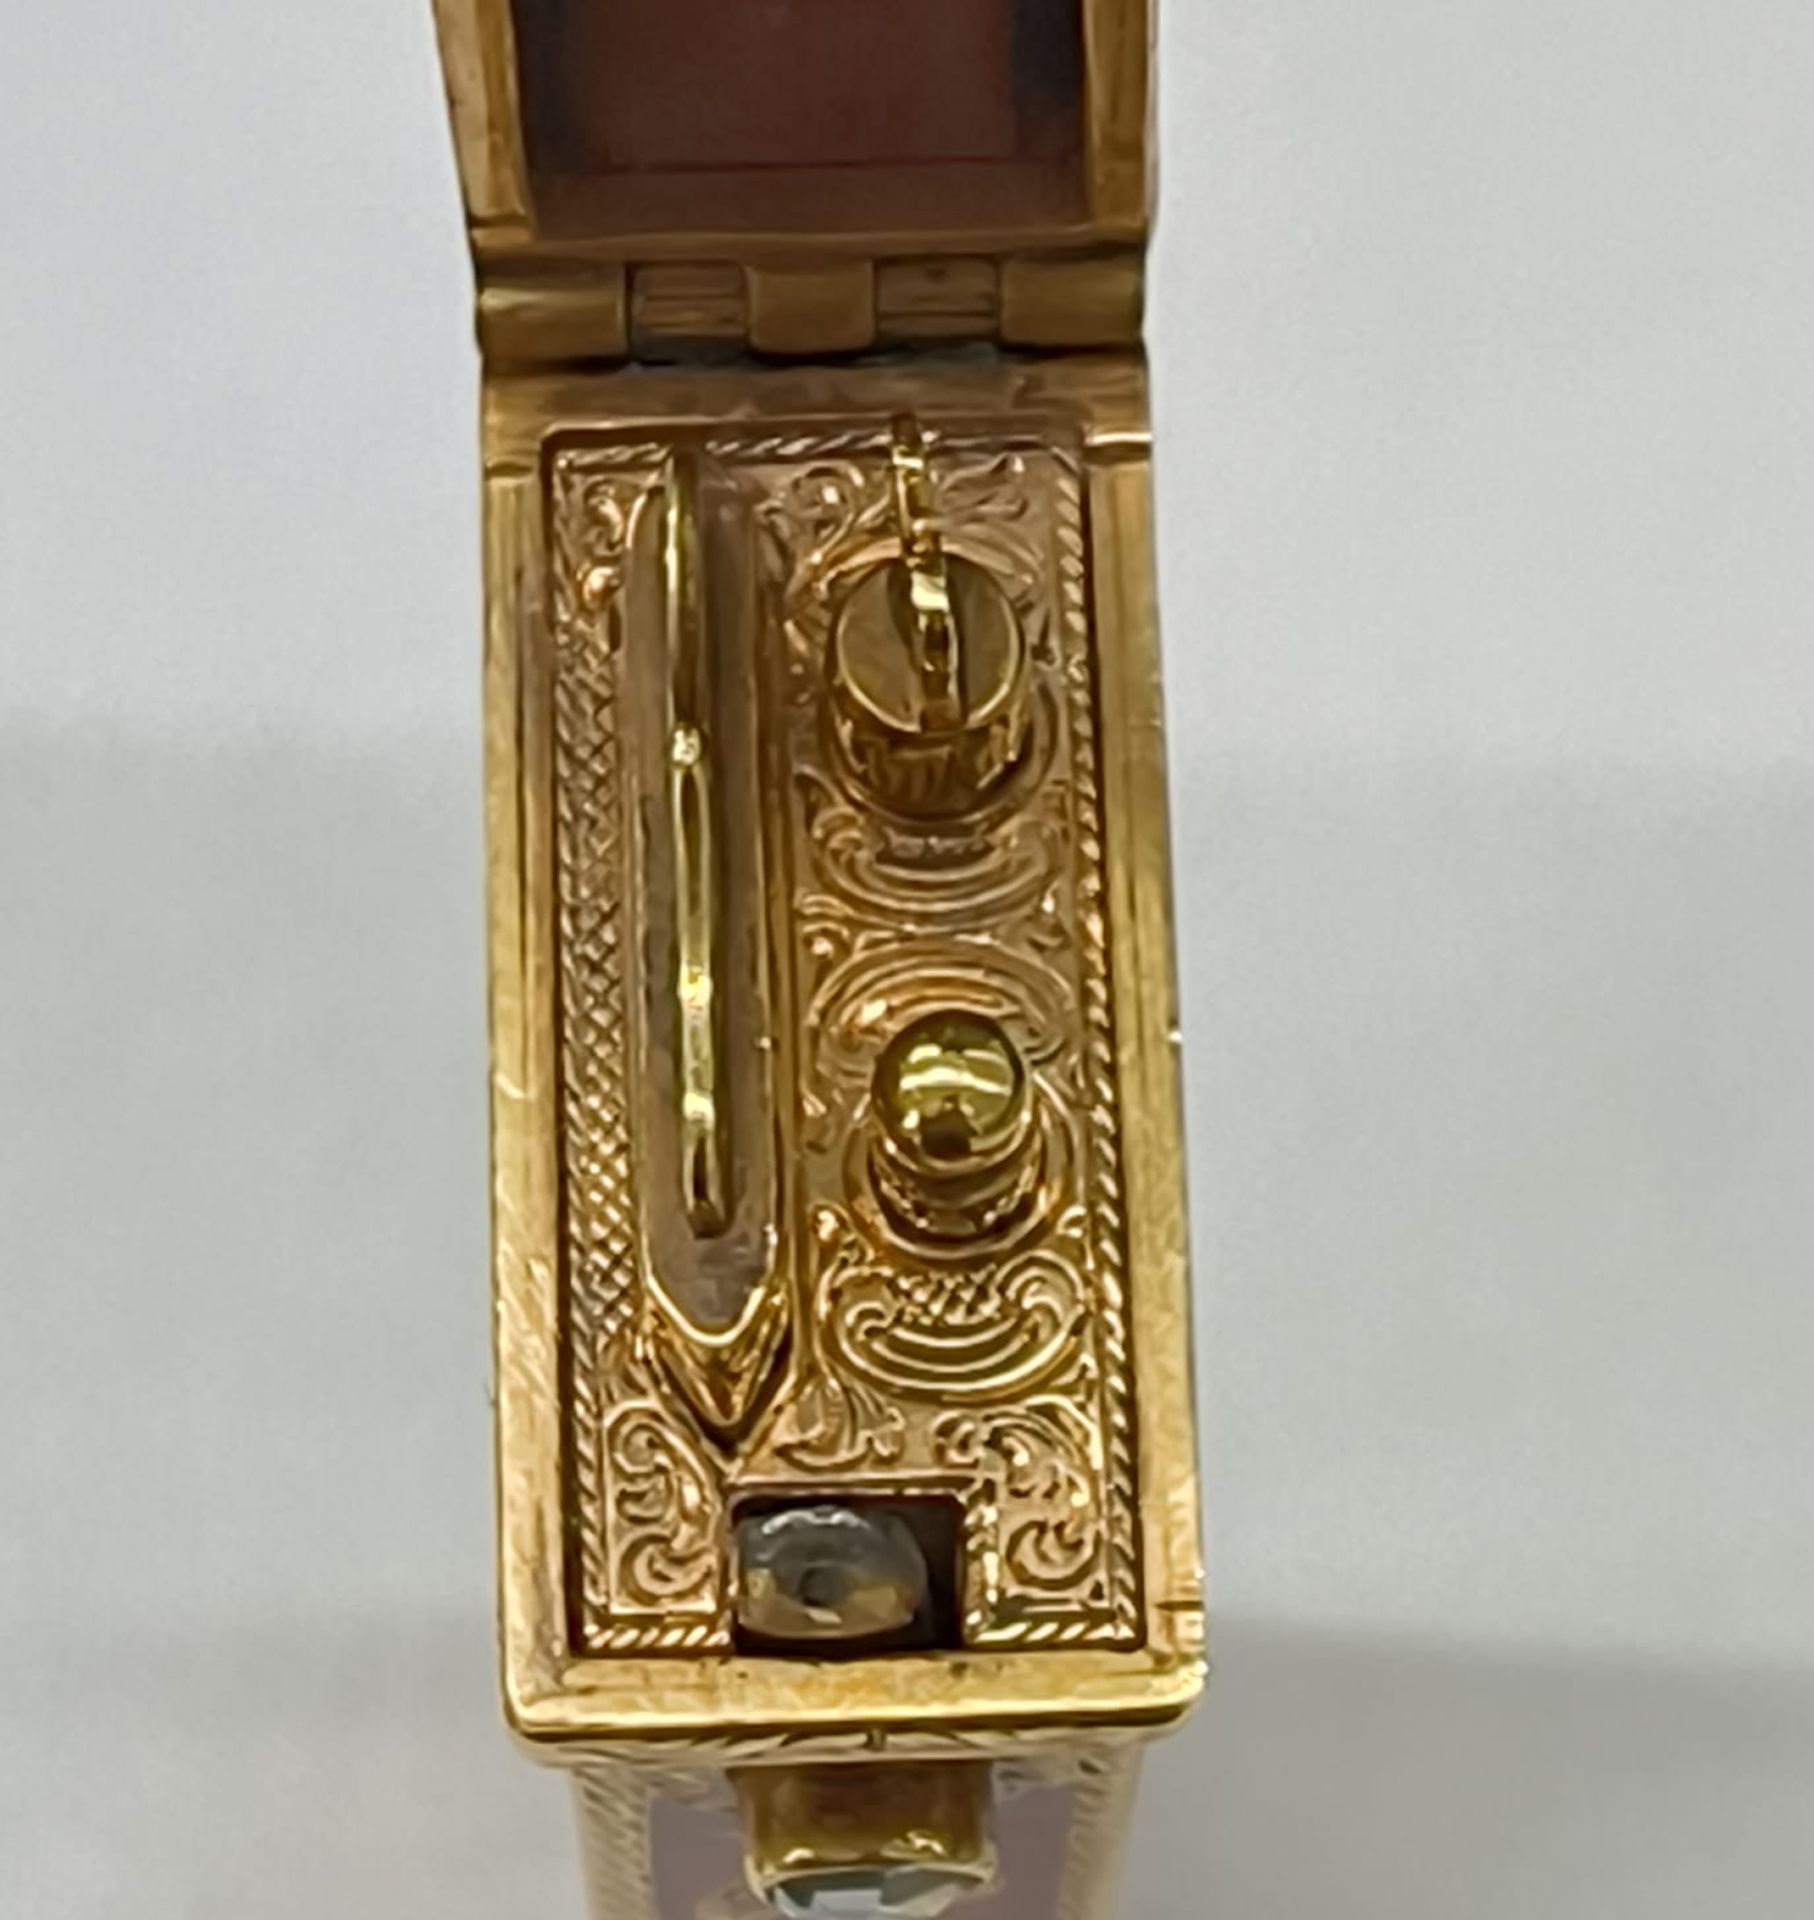 Etui in sterling gold and enamel set with rubies and old-cut diamond, Russian work from the early 20 - Image 8 of 8